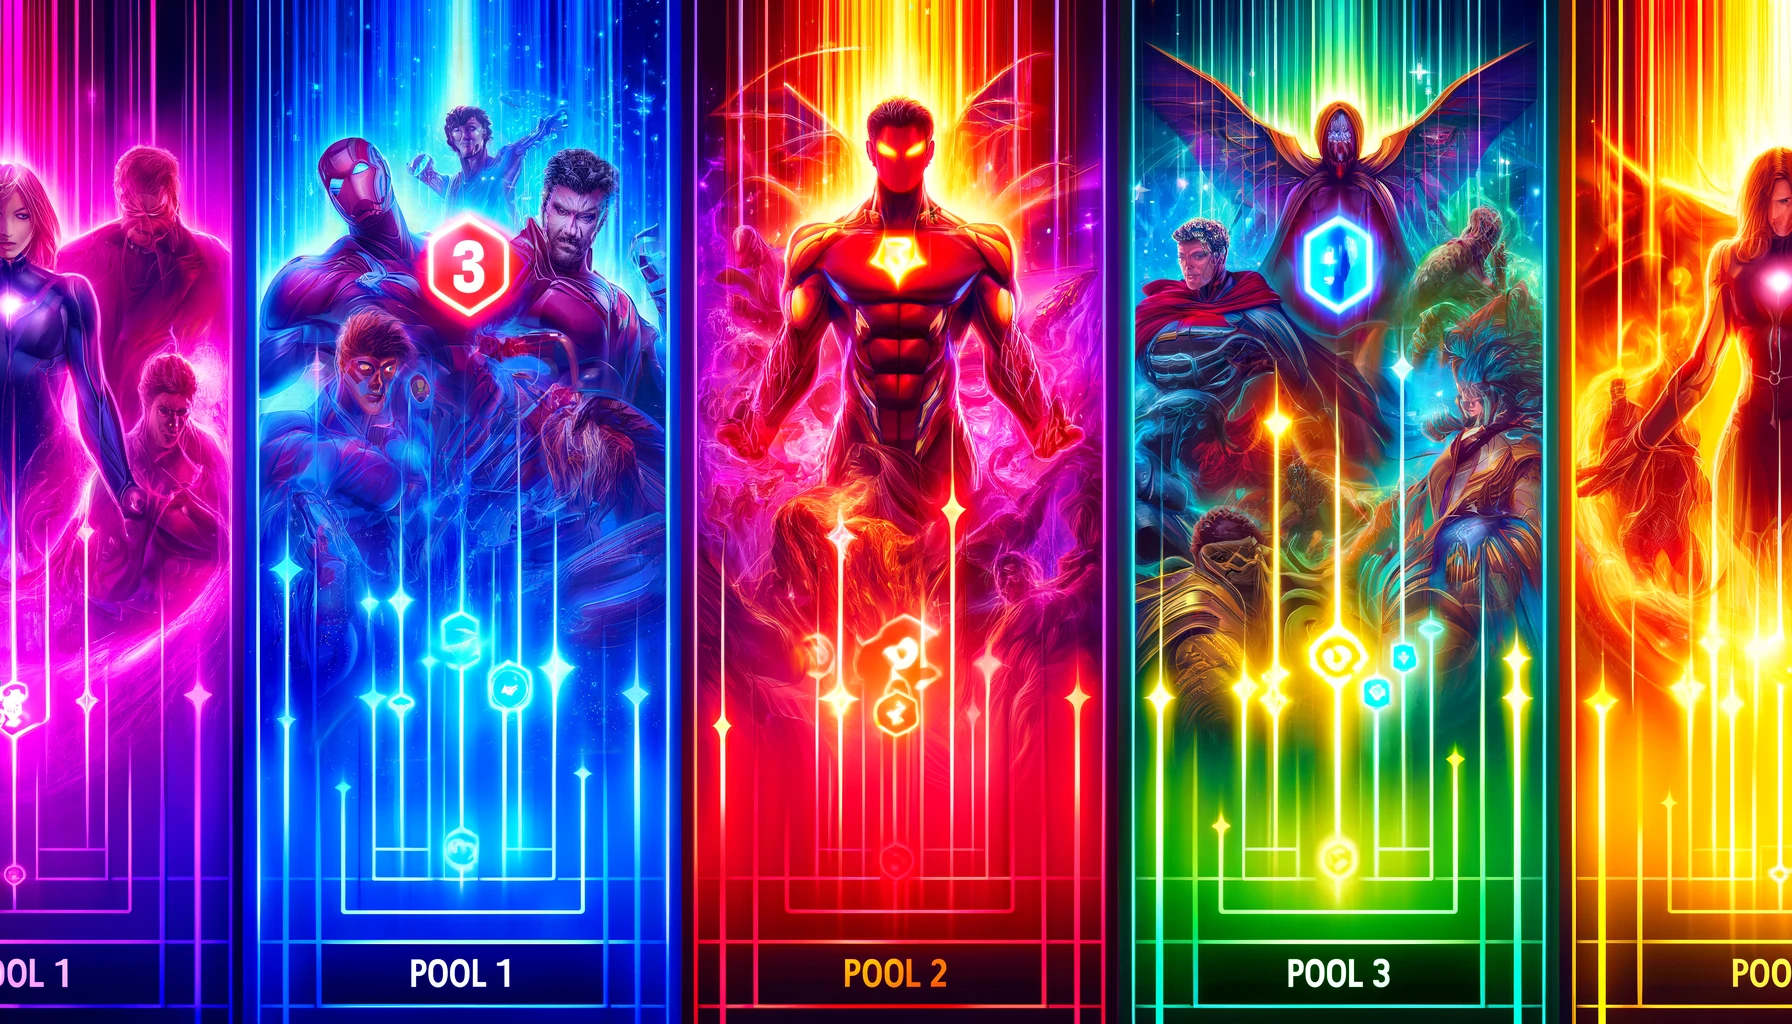 A colorful wide-format image showing Marvel Snap card pools and rarities. Cards glow in vivid hues, grouped into Pool 1, Pool 2, and Pool 3, with superheroes and villains featured. Visual indicators highlight progression from Common to Infinity.